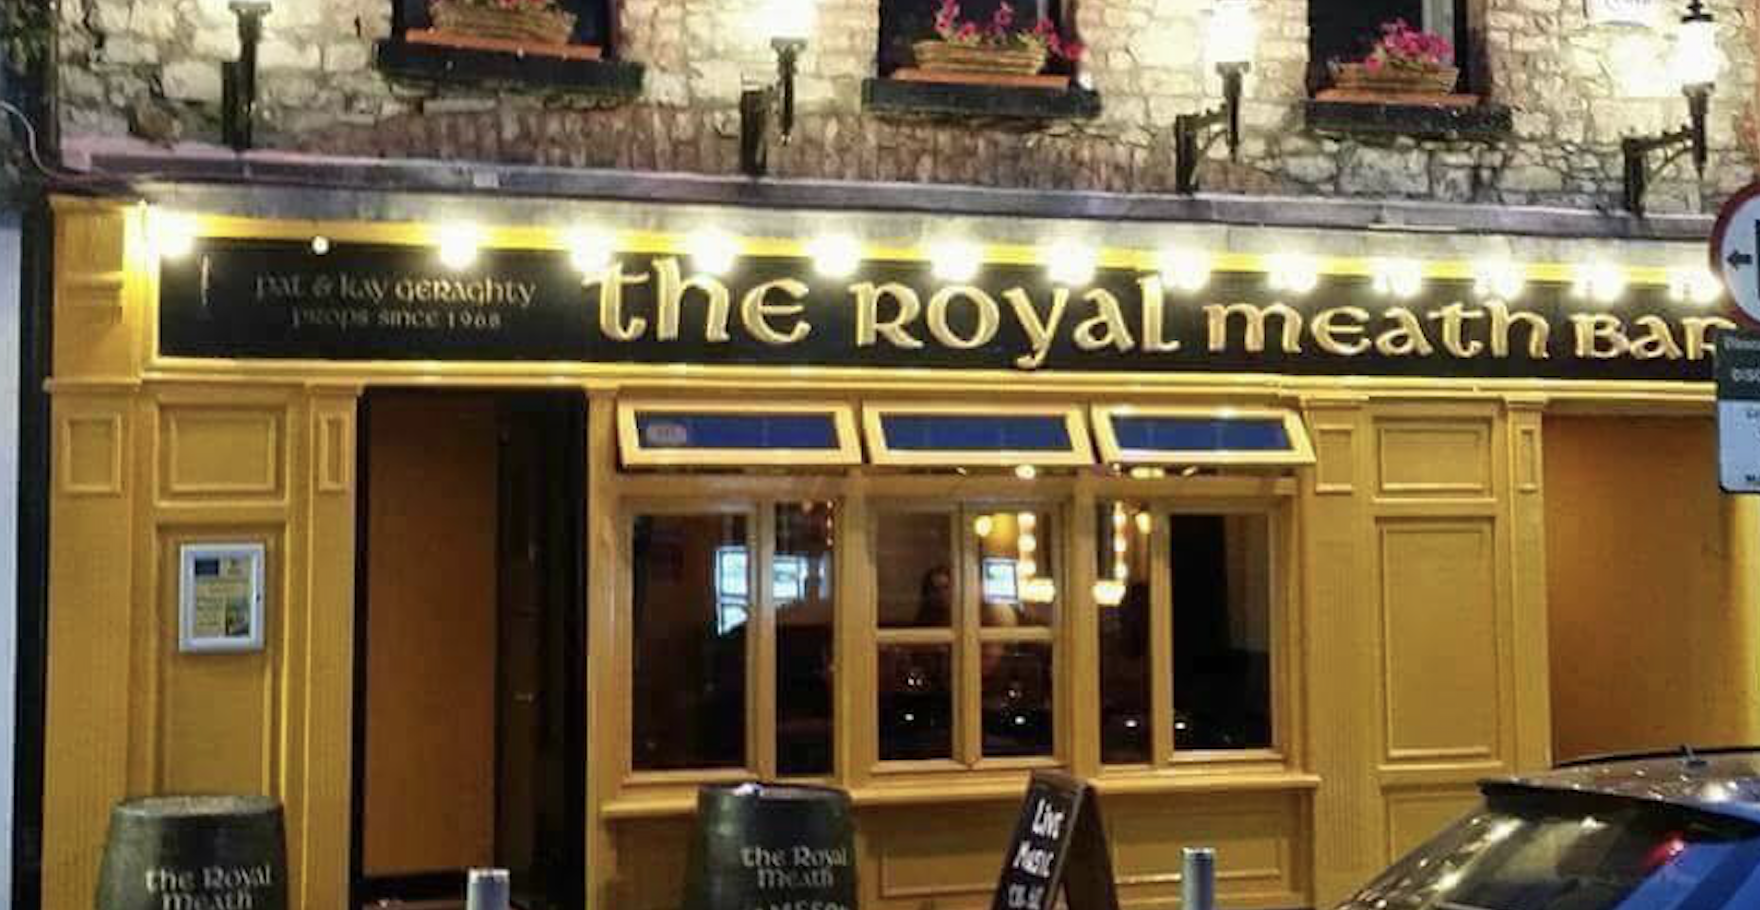 Irish pub looking for food and drink ‘connoisseurs’ to test menu for free ahead of reopening 